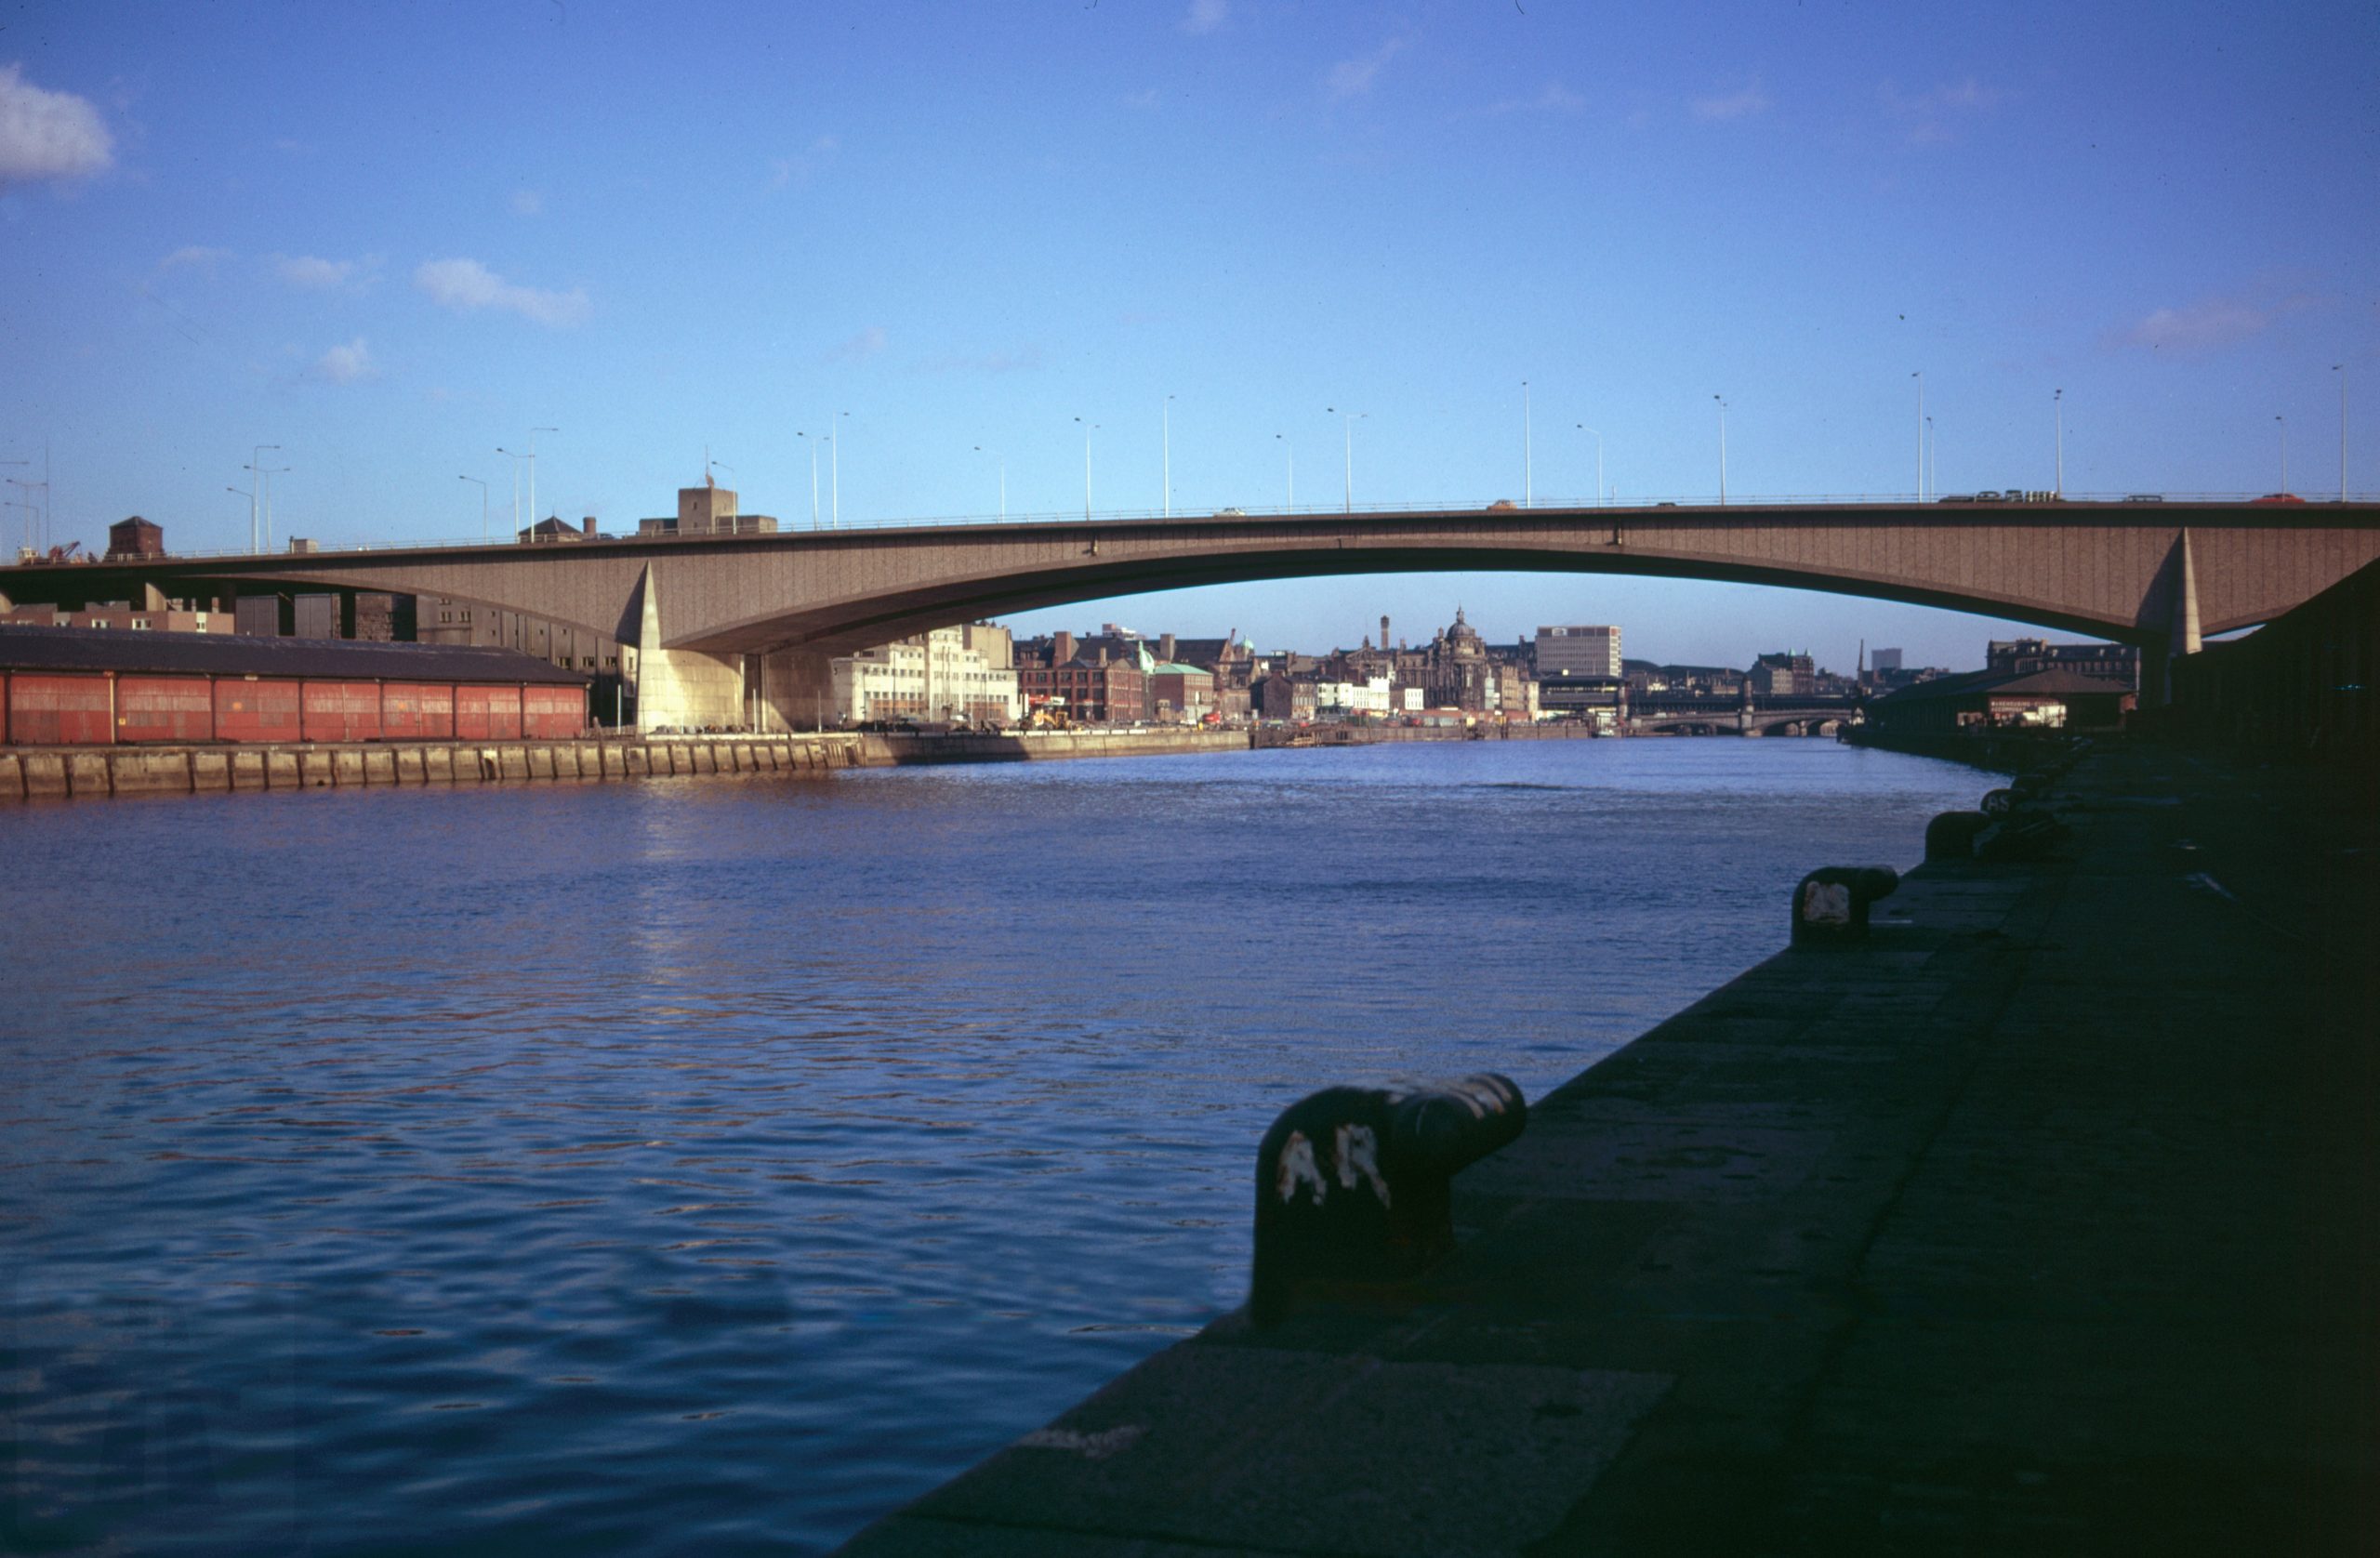 The bridge after opening in 1970